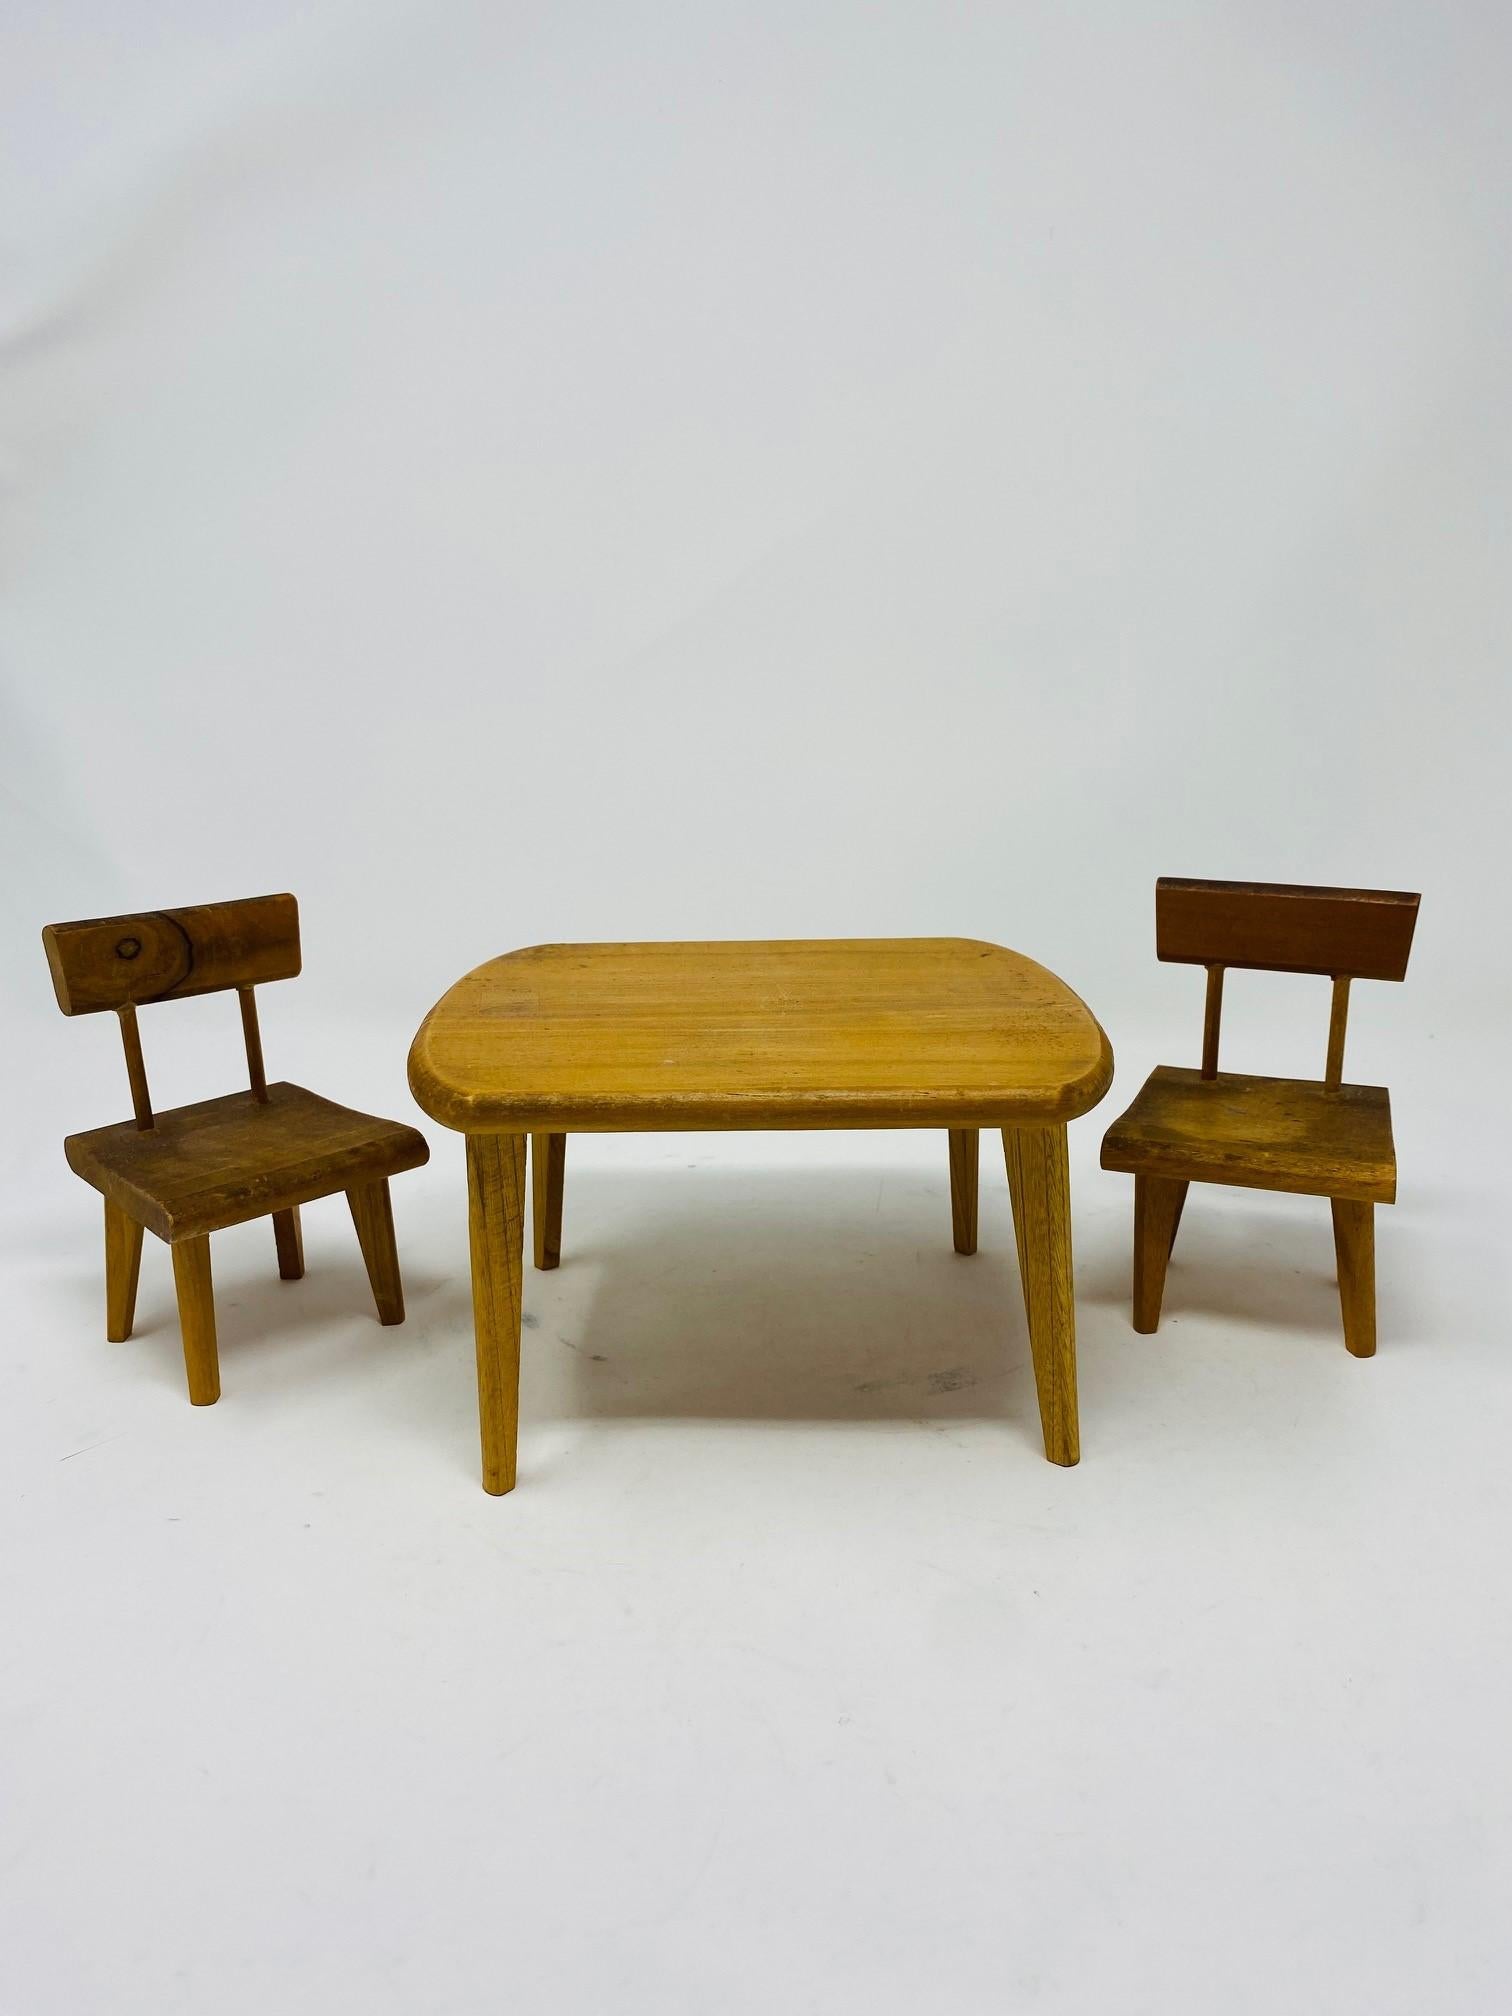 Group of Mid-Century Modern-style Miniature Wooden Furniture, featuring a table and two chairs. This vintage set was created by hand in the early 1960s. Ideal for decor or models. Table is 4.1